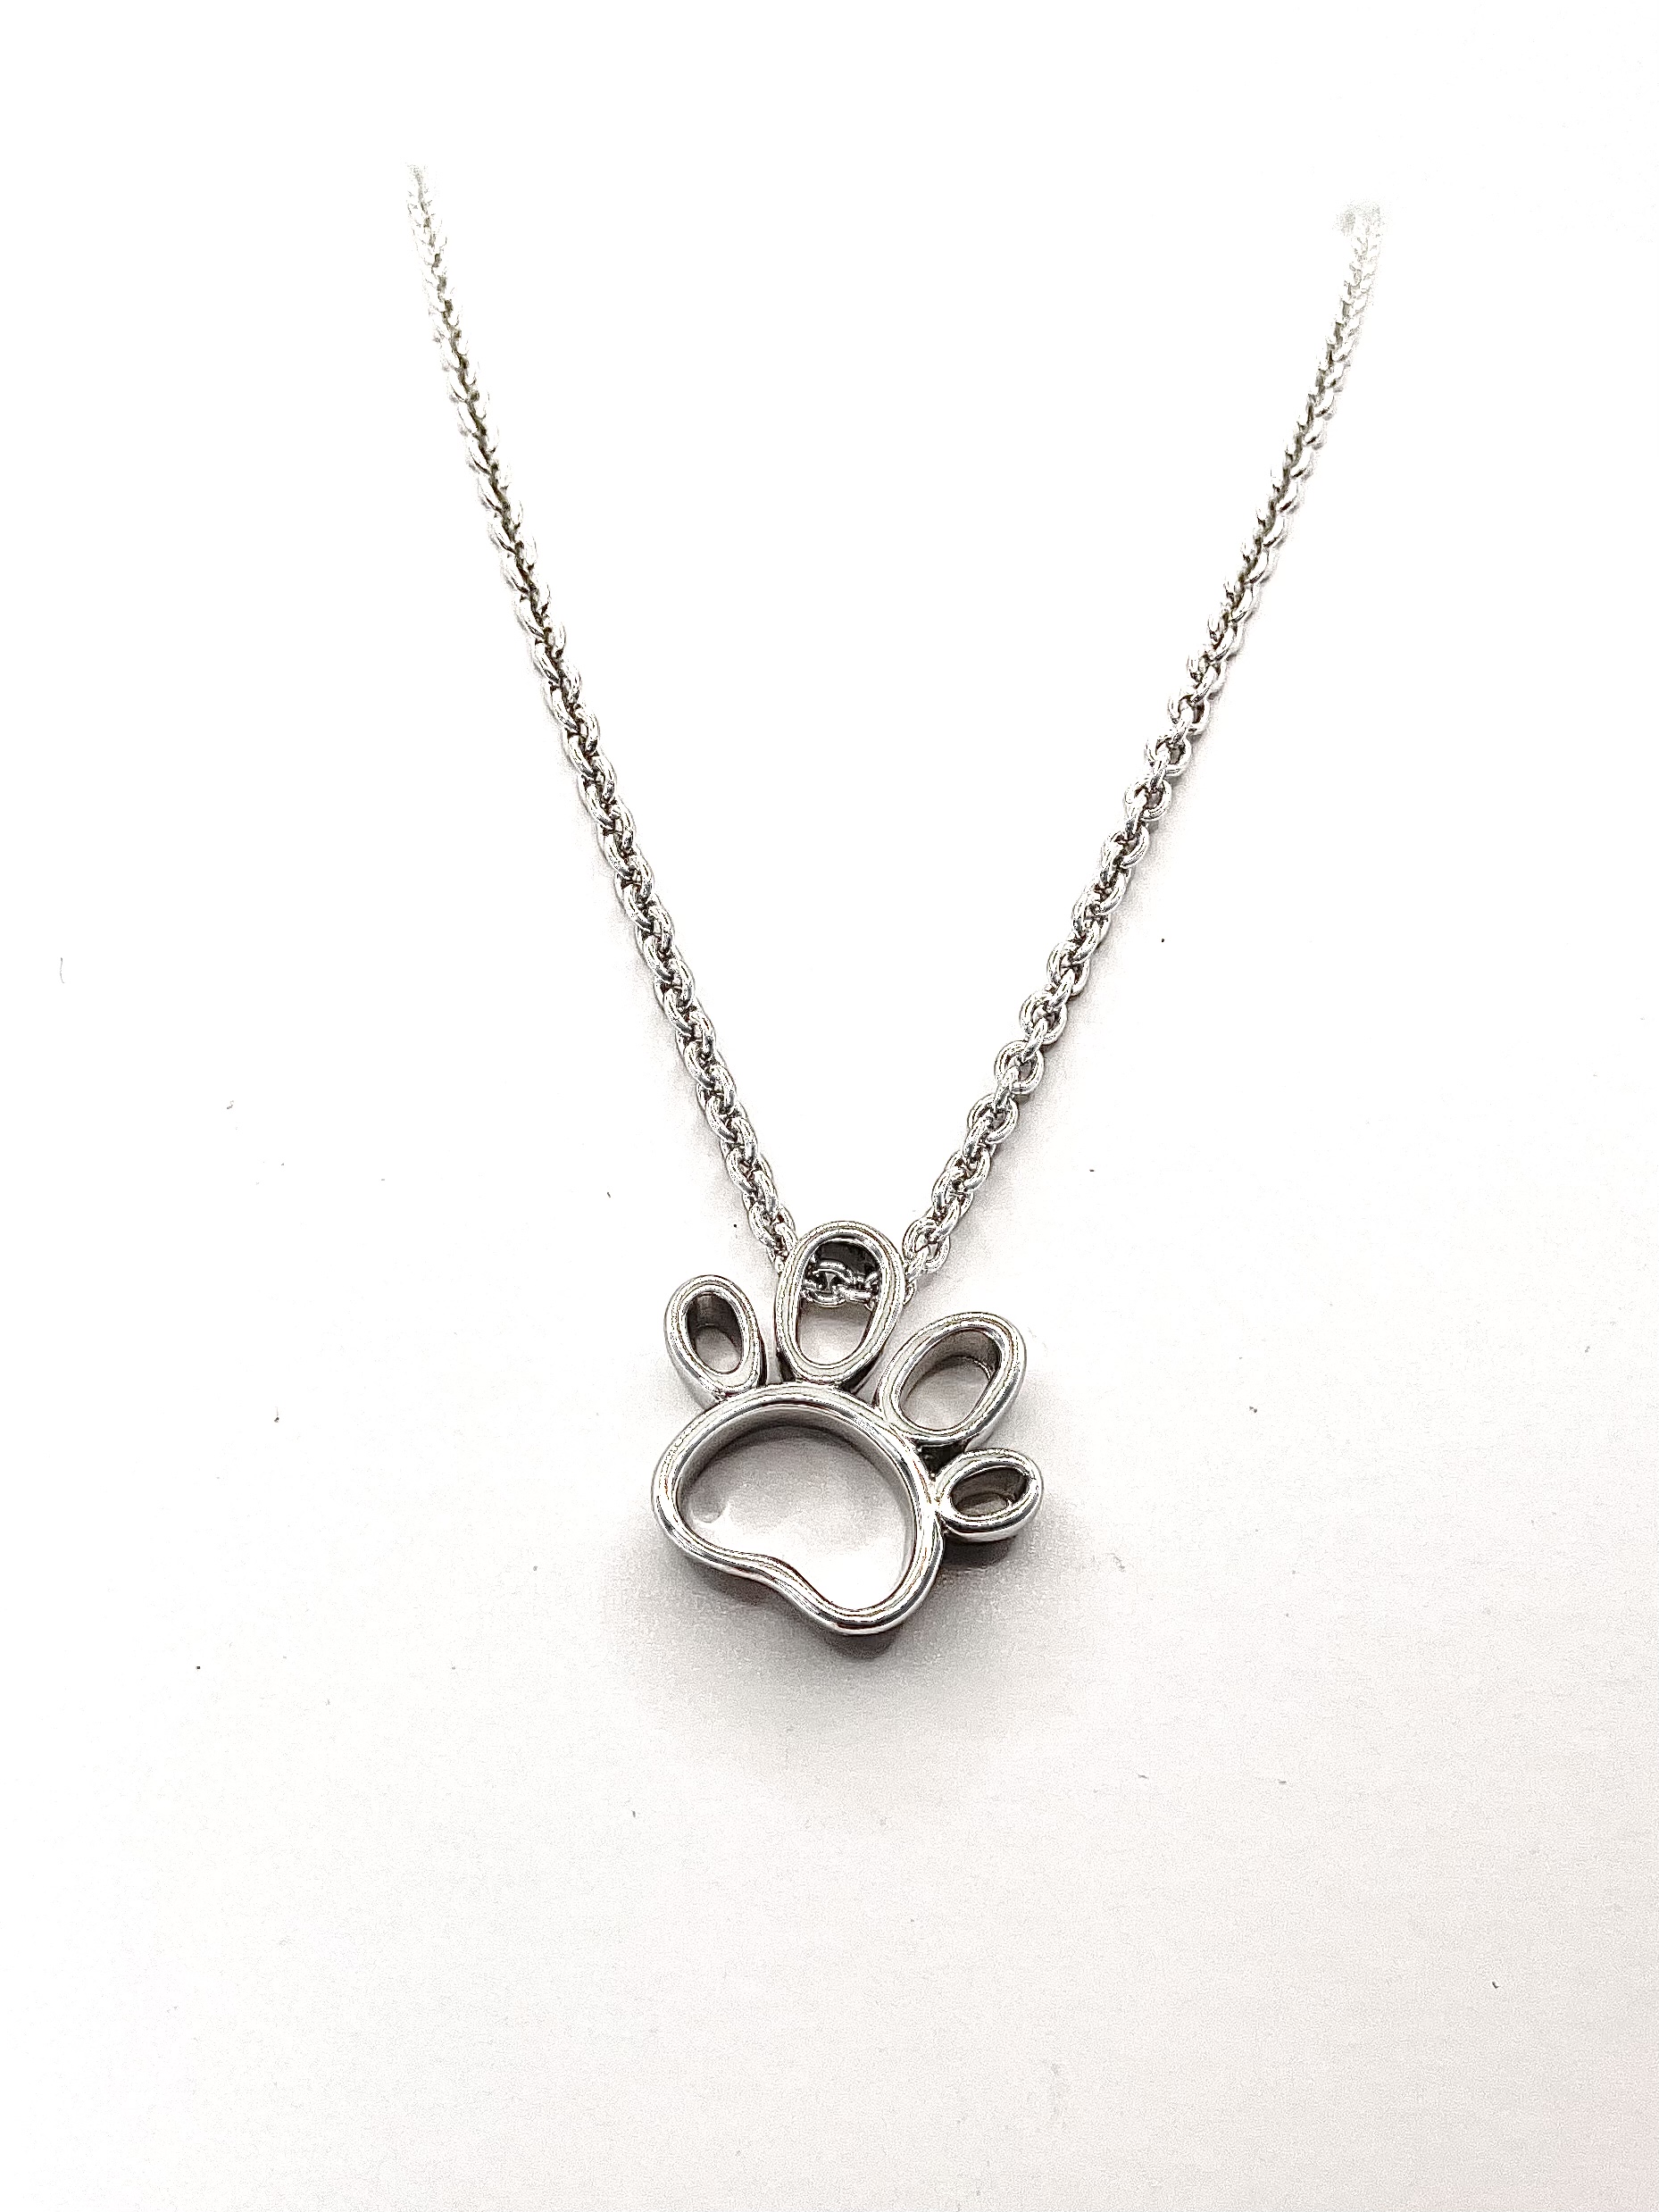 Buy Silver Dog Paw Necklace / Cat Paw Charm / 925 Sterling Silver Charm  Pendant / Puppy Animal Lover Pendant / Kitty Gift for Pet Lovers 1628  Online in India - Etsy